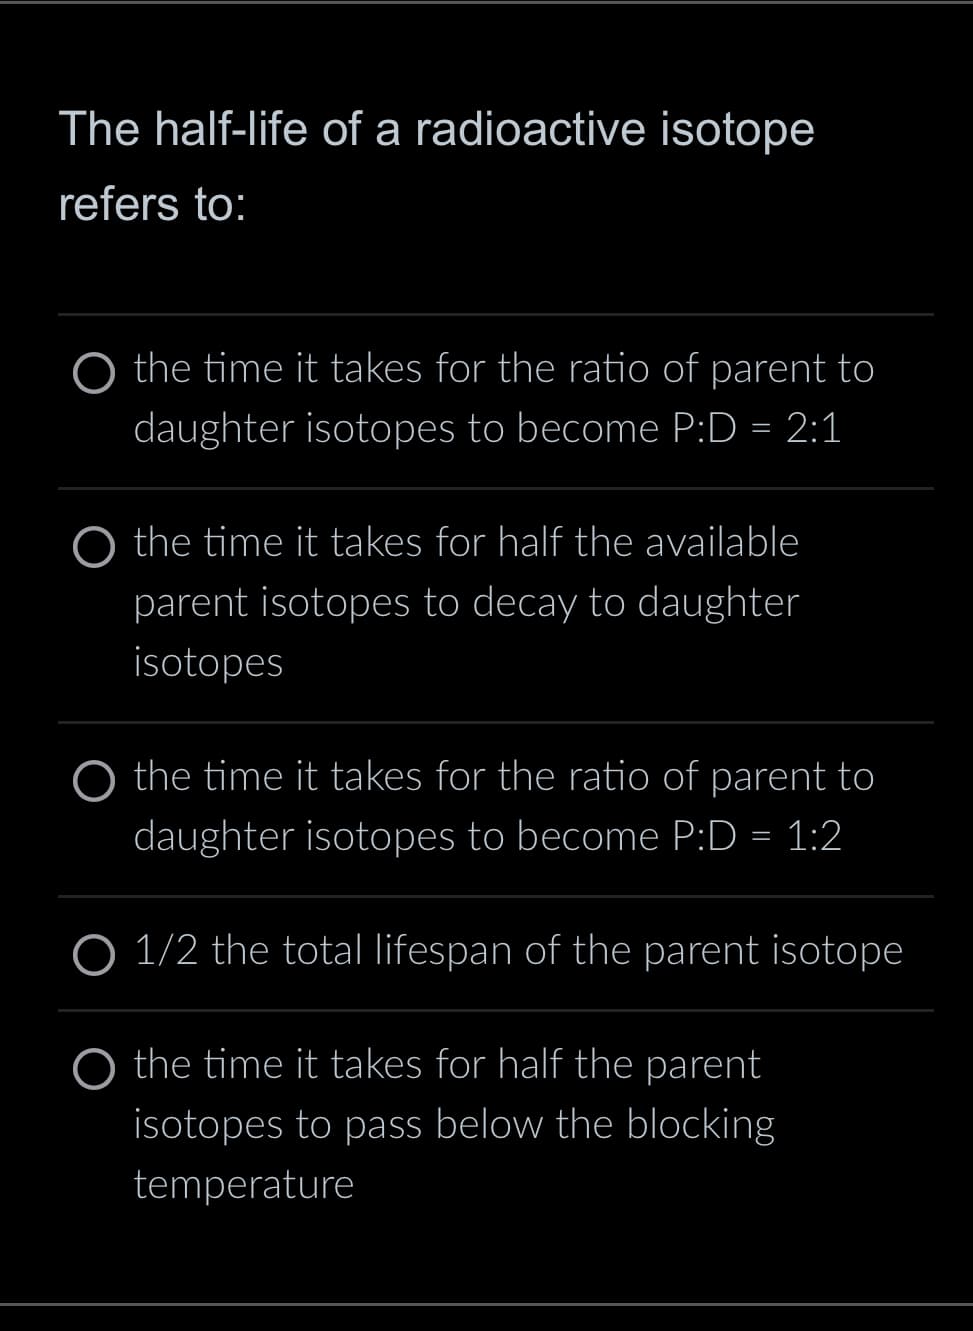 The half-life of a radioactive isotope
refers to:
the time it takes for the ratio of parent to
daughter isotopes to become P:D = 2:1
the time it takes for half the available
parent isotopes to decay to daughter
isotopes
the time it takes for the ratio of parent to
daughter isotopes to become P:D = 1:2
O 1/2 the total lifespan of the parent isotope
O the time it takes for half the parent
isotopes to pass below the blocking
temperature